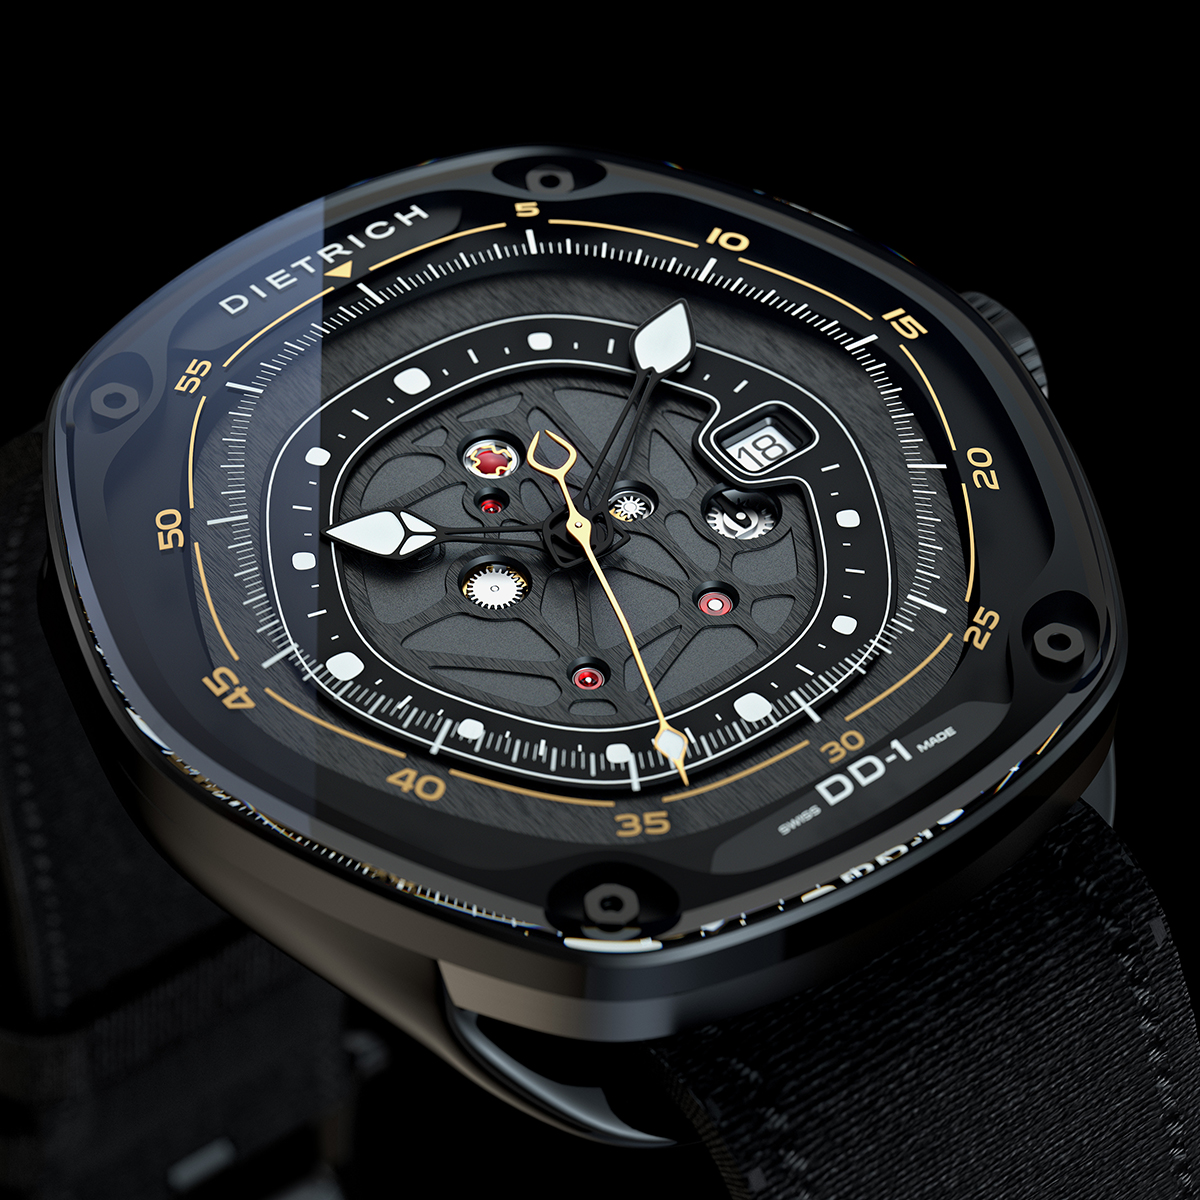 Introducing The New Dietrich Device 1 (DD-1) Watch